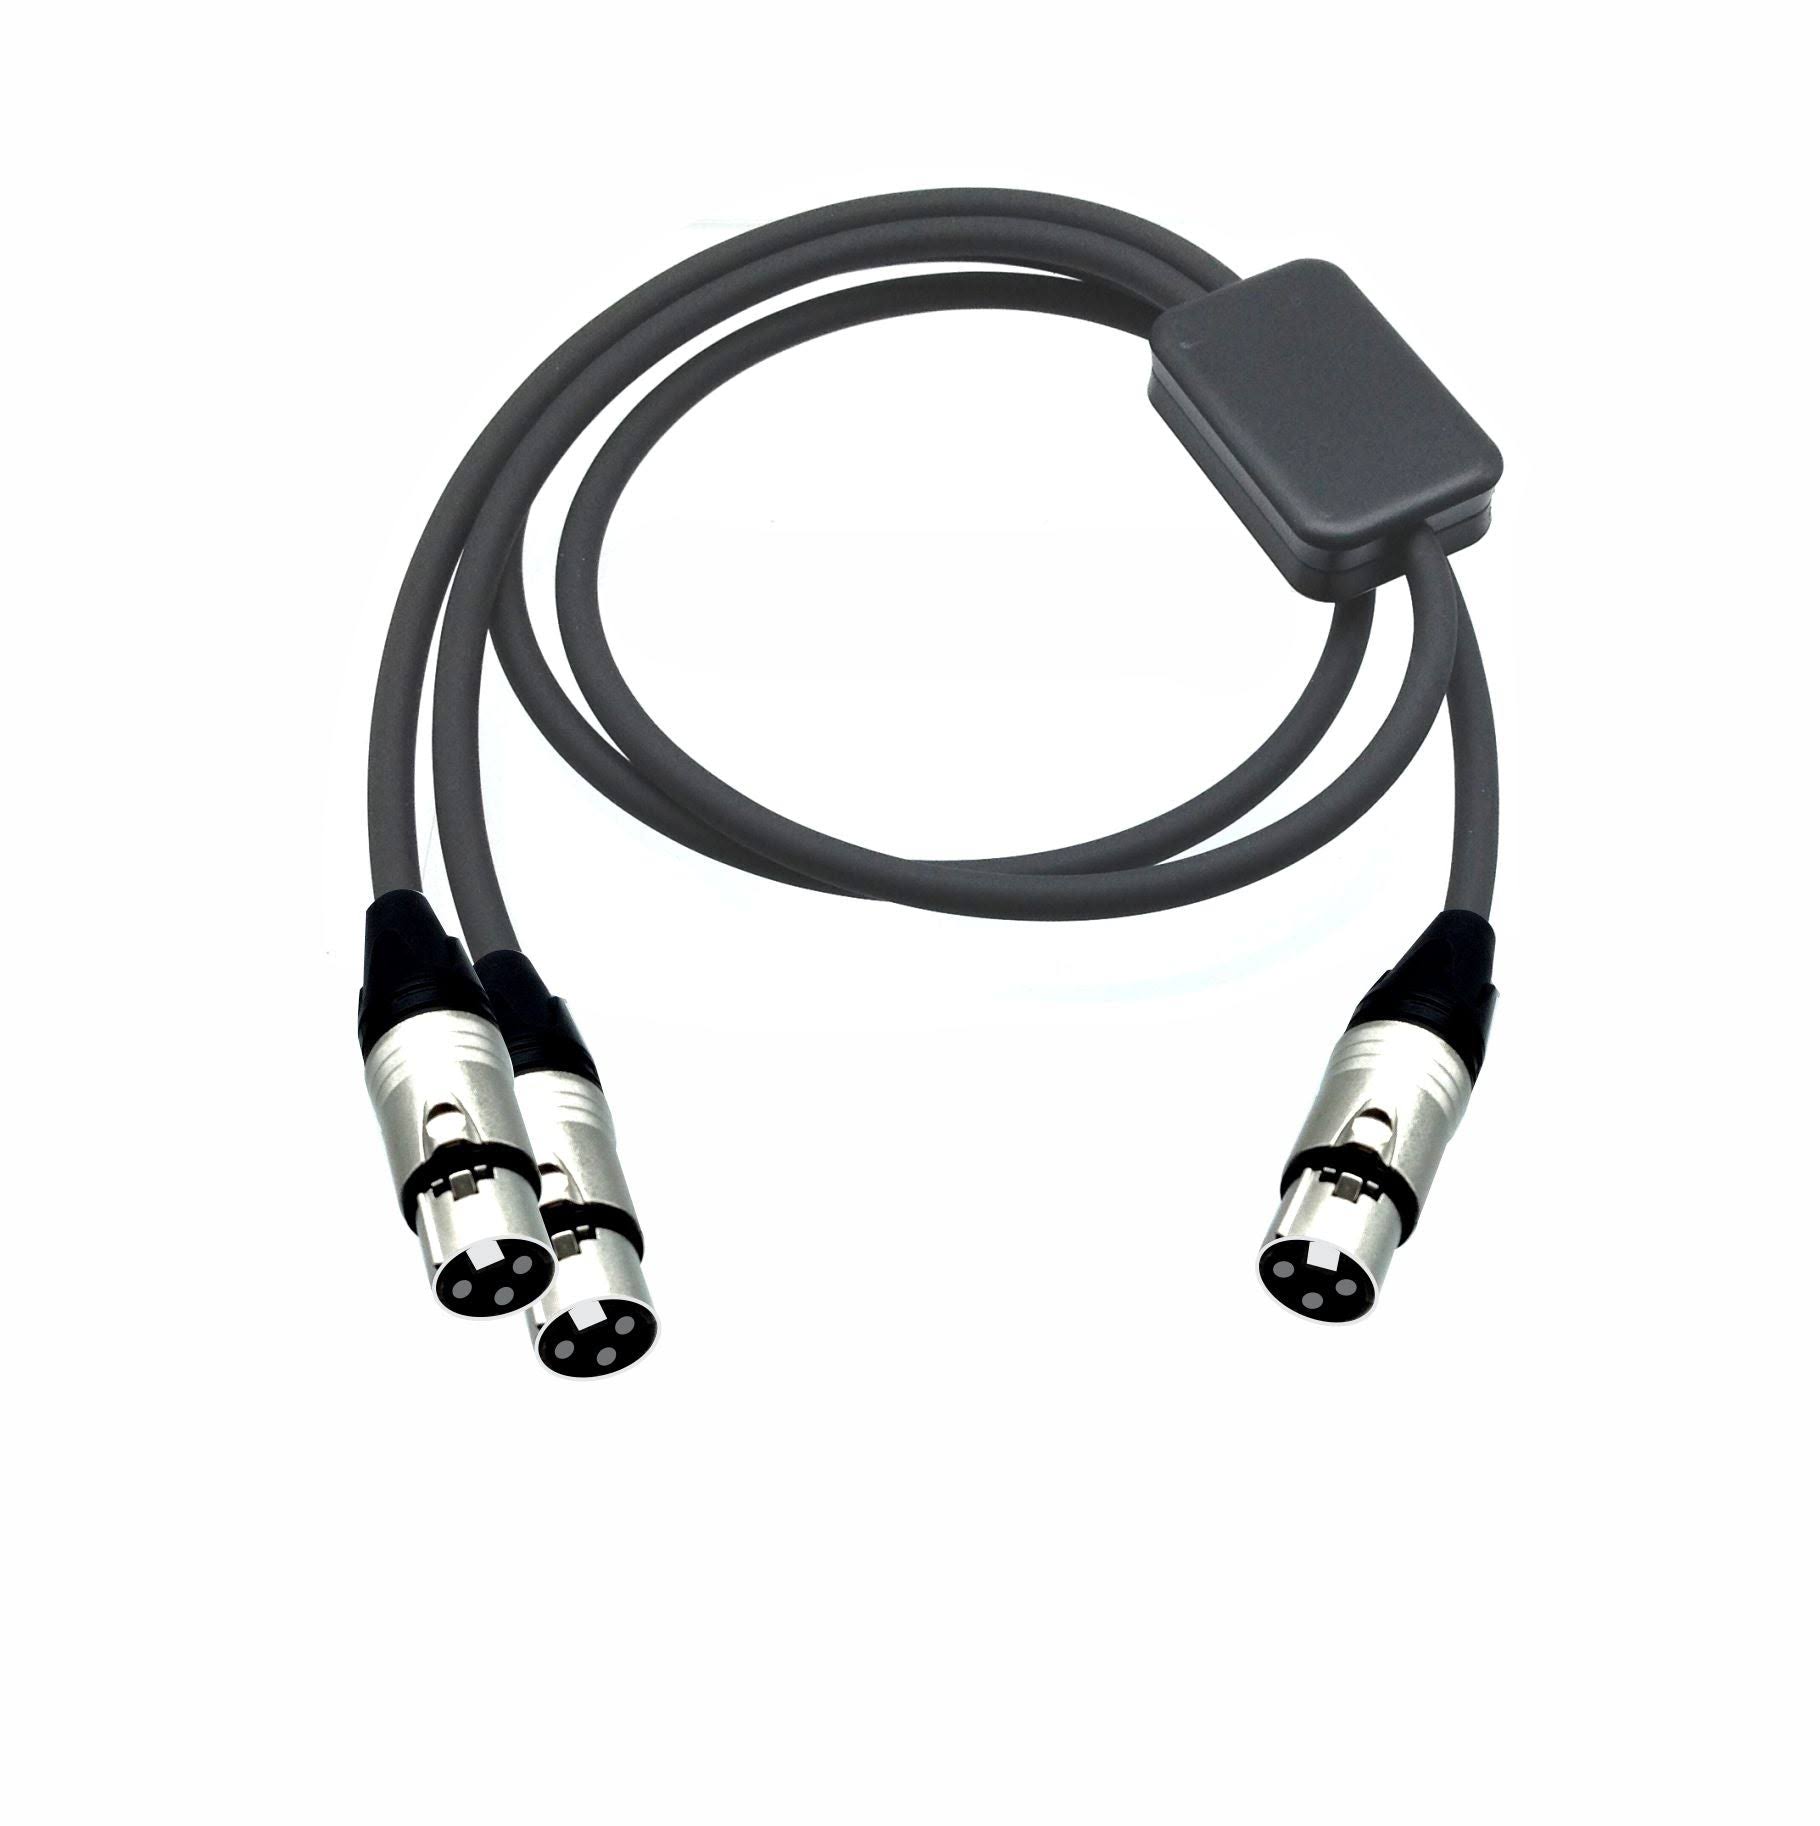 American Recorder Pro Series Y Cable - XLR Female